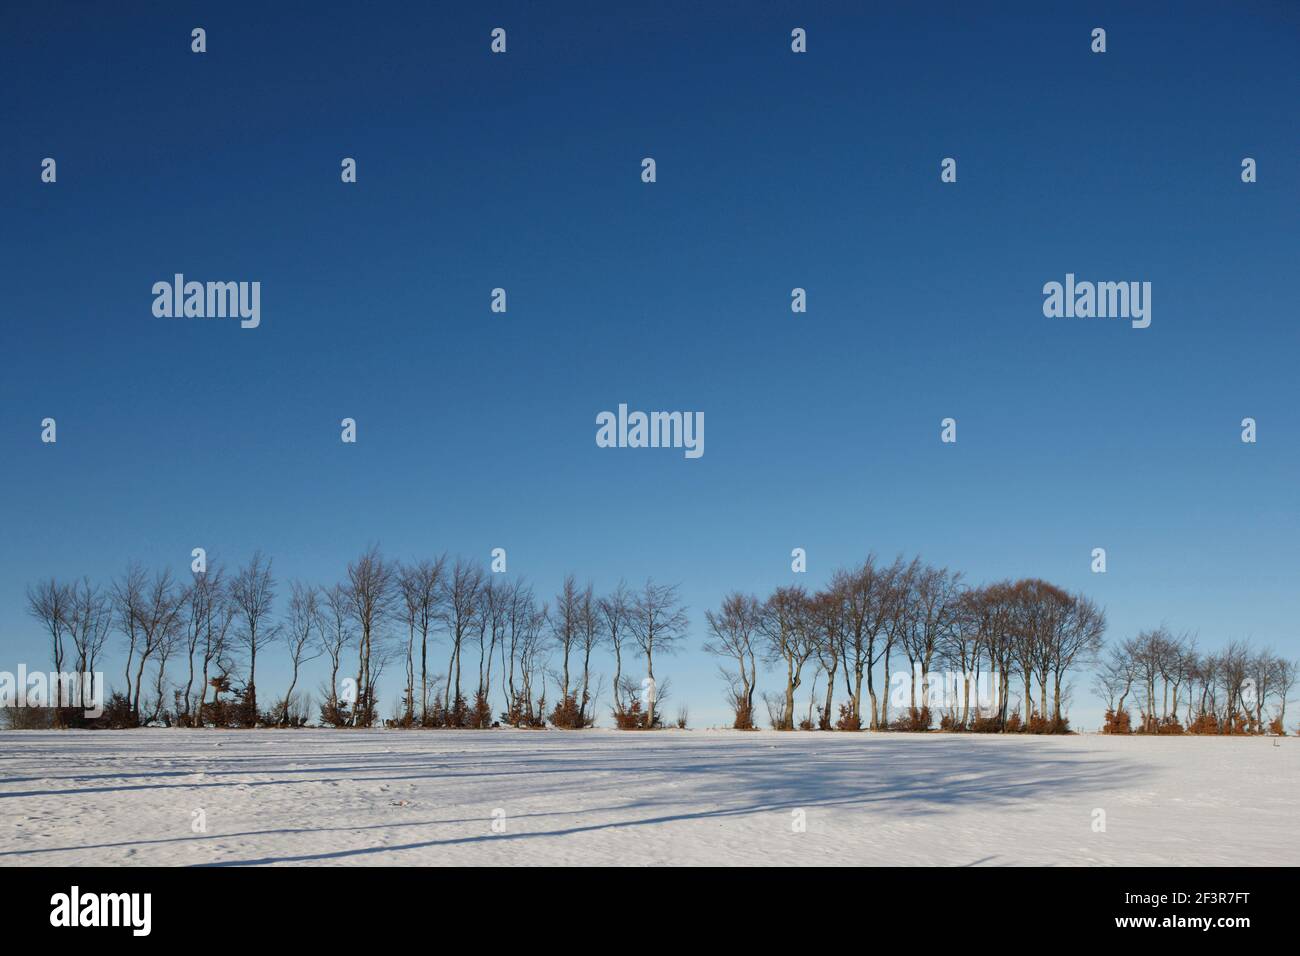 Snowy landscape with line of beech trees in the Eifel mountain area in Simmerath, Germany Stock Photo